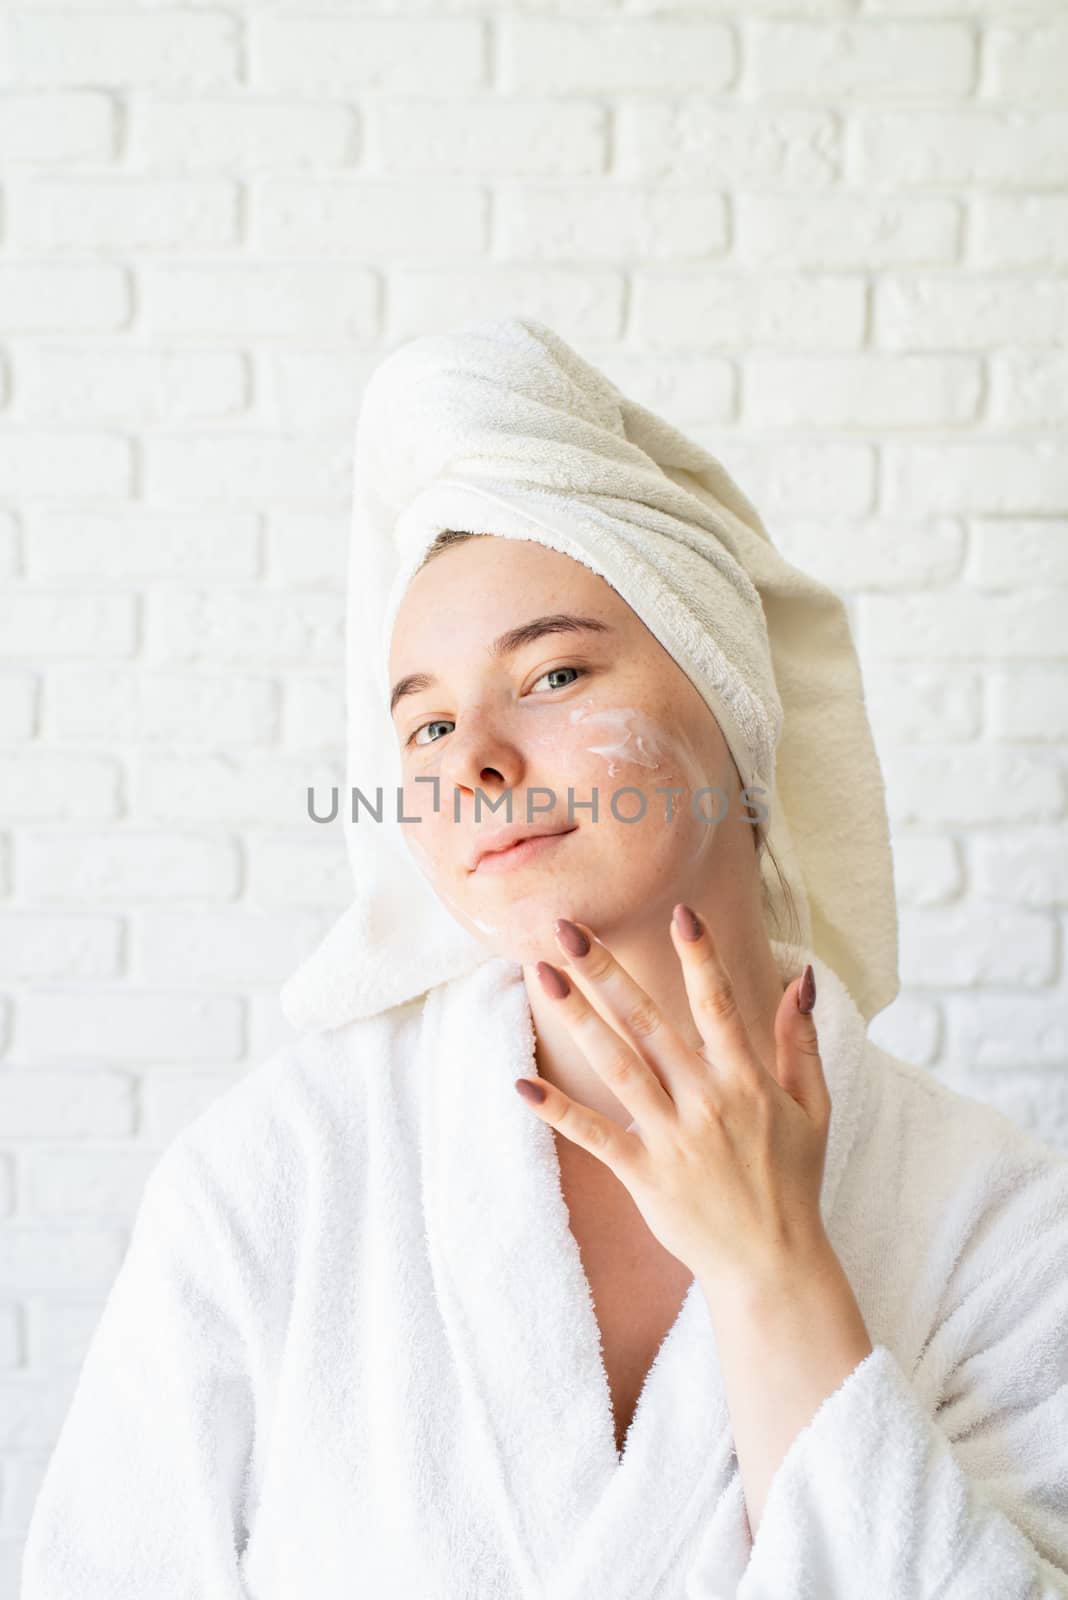 Spa and wellness. Natural cosmetics. Self care. Happy young caucasian woman in white bath towel applying face cream at home